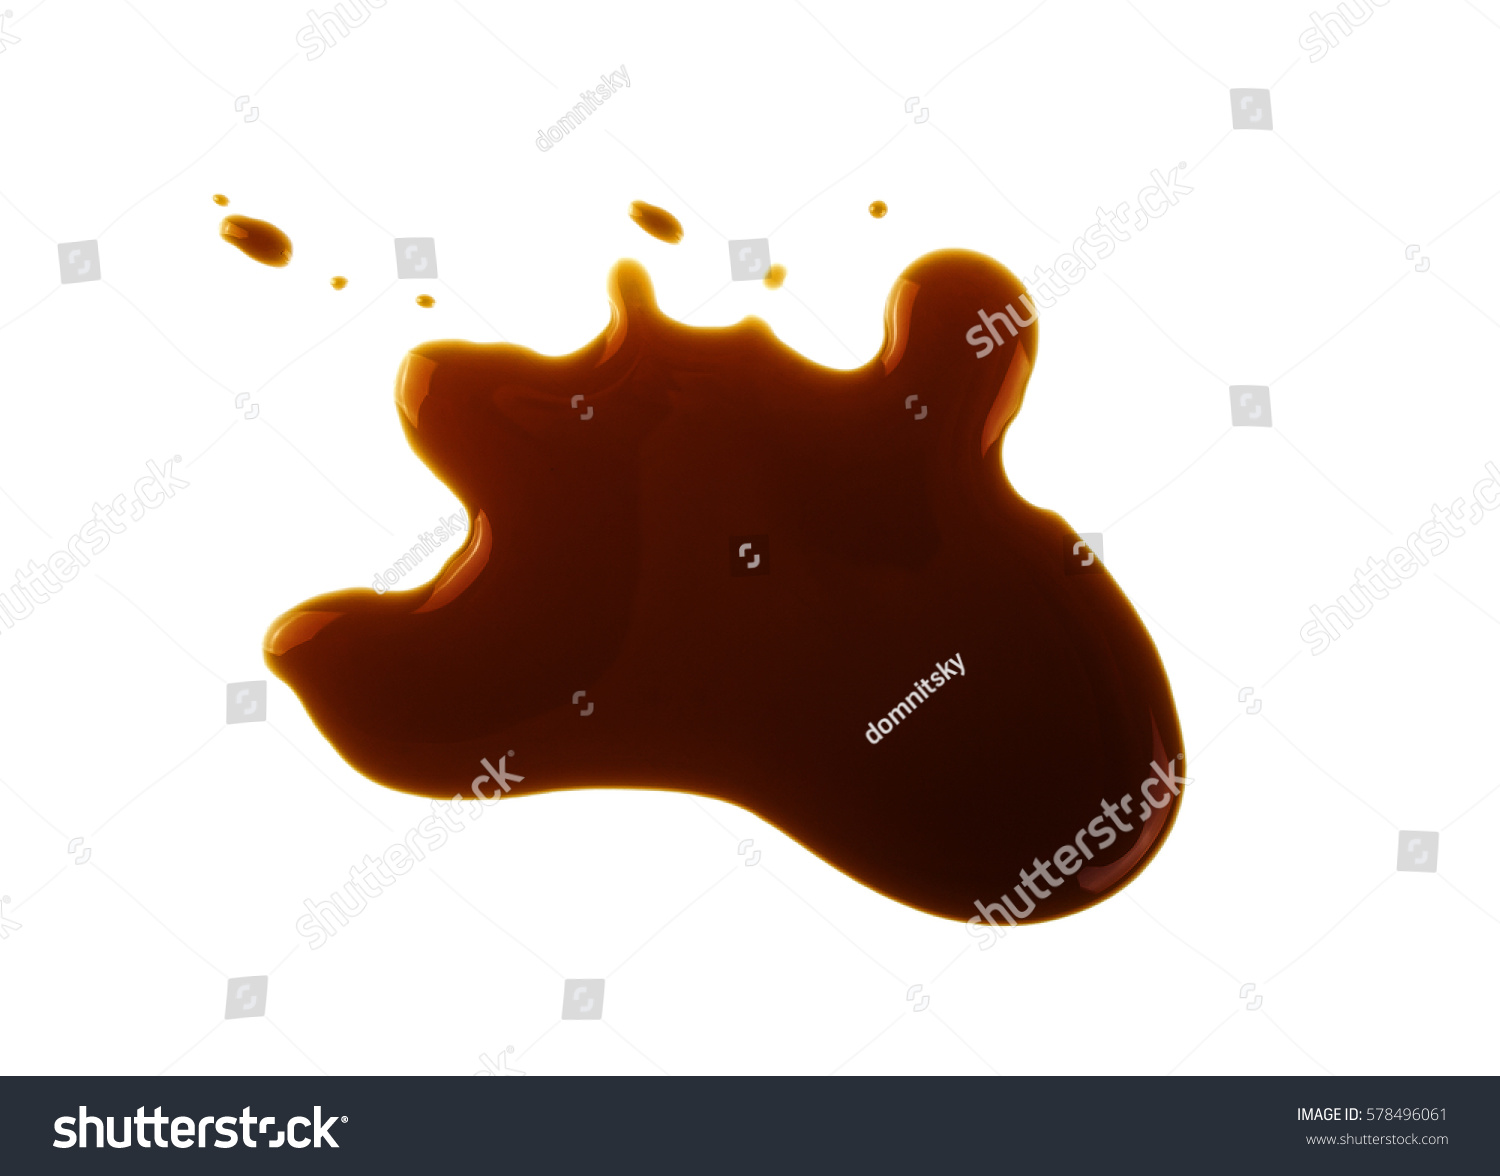 Puddle of soy sauce isolated on a white background #578496061